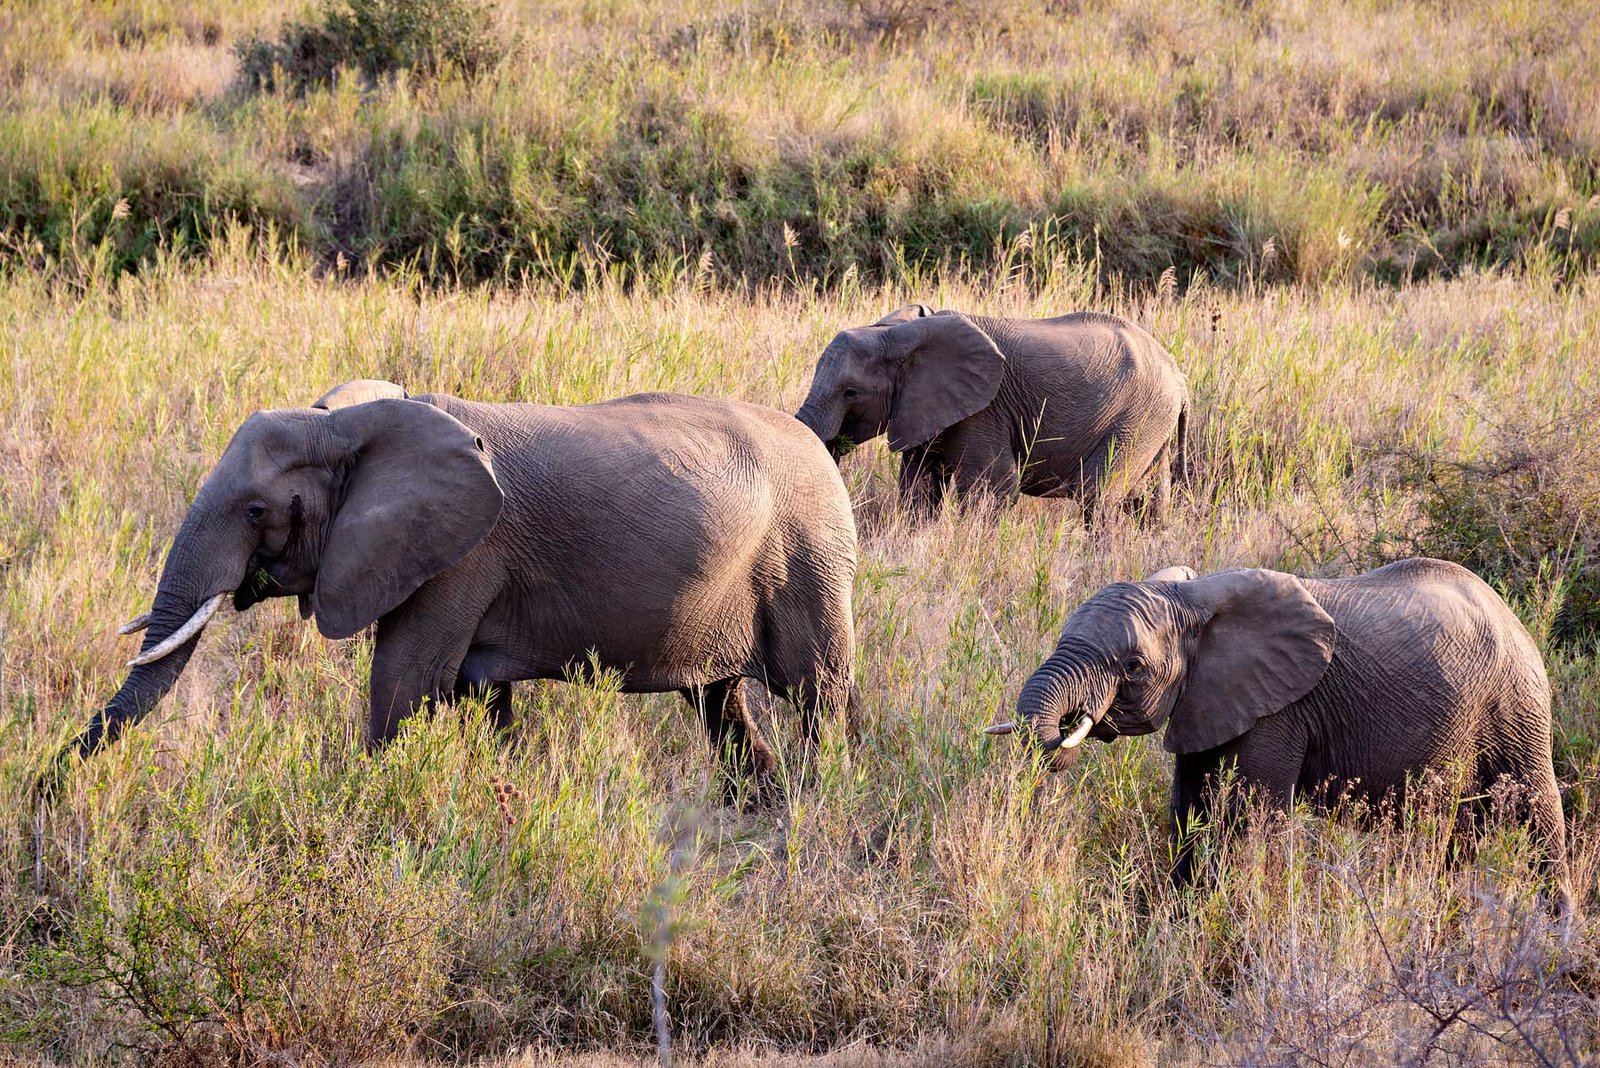 Elephants at Kruger Park. South Africa in 3 Weeks | The Perfect South Africa itinerary for your first trip.